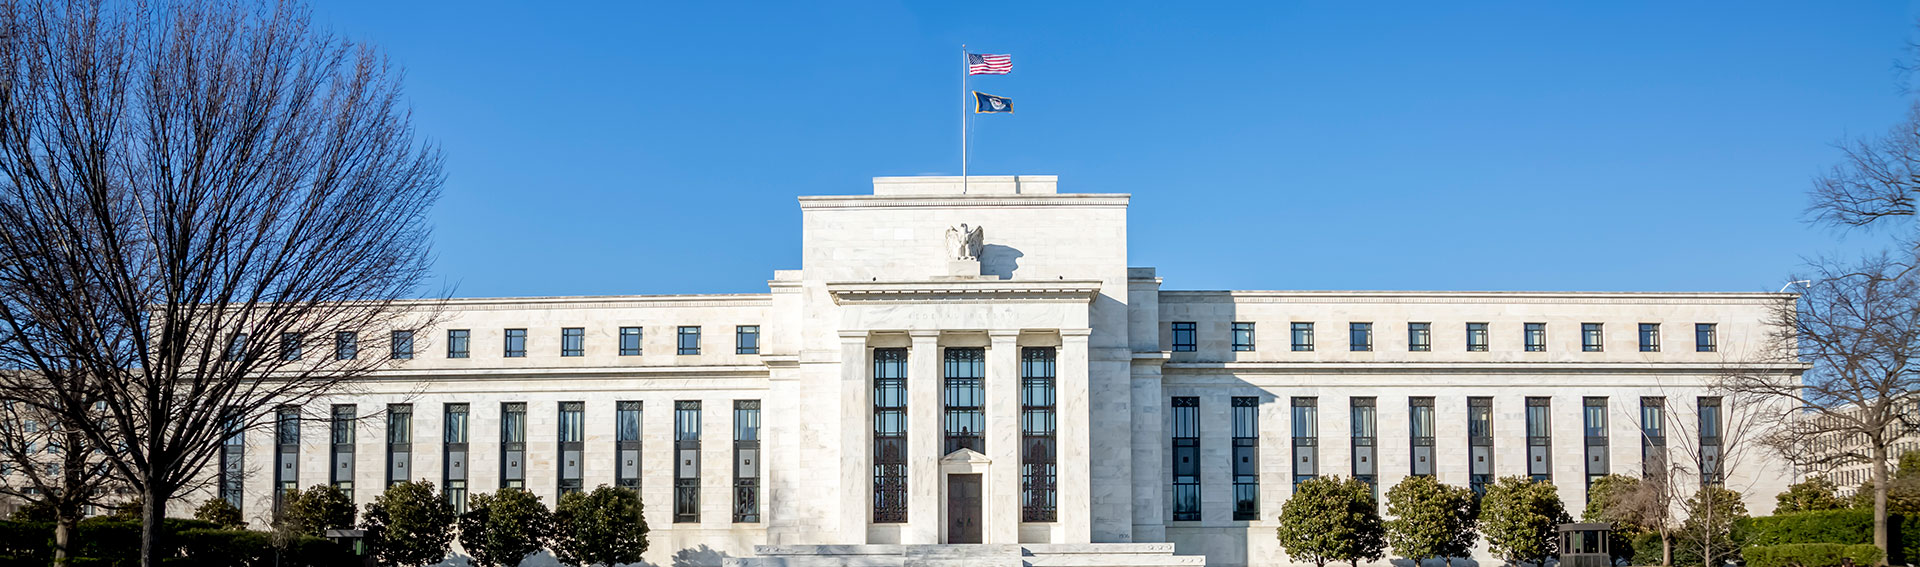 Rate hikes: Is the cycle over?